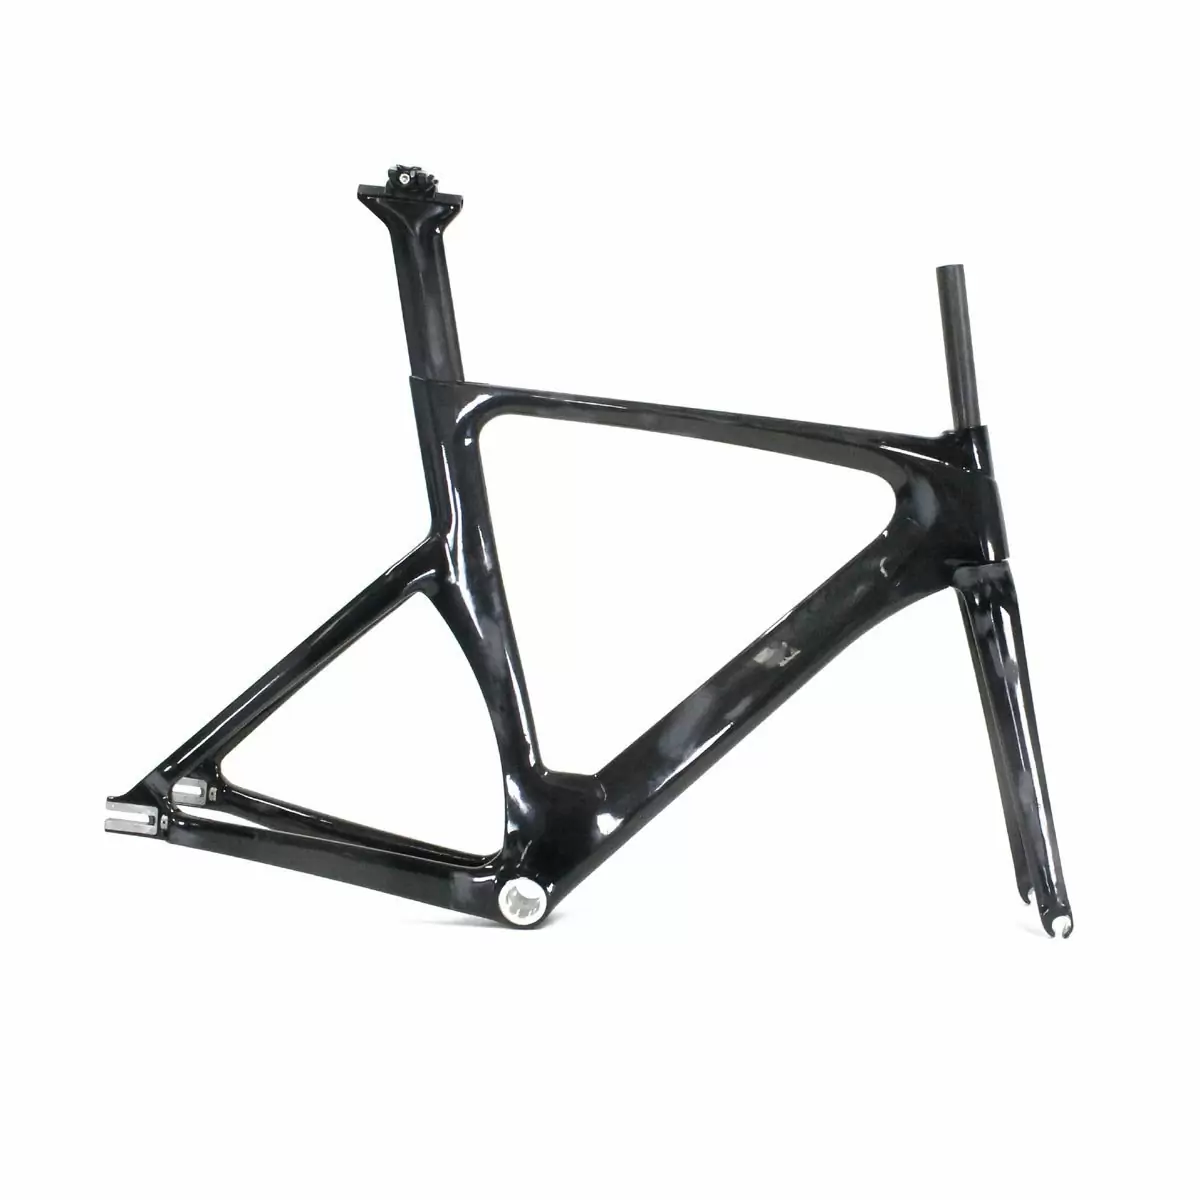 Cadre Track / Pista full carbon BSA taille 52 #1